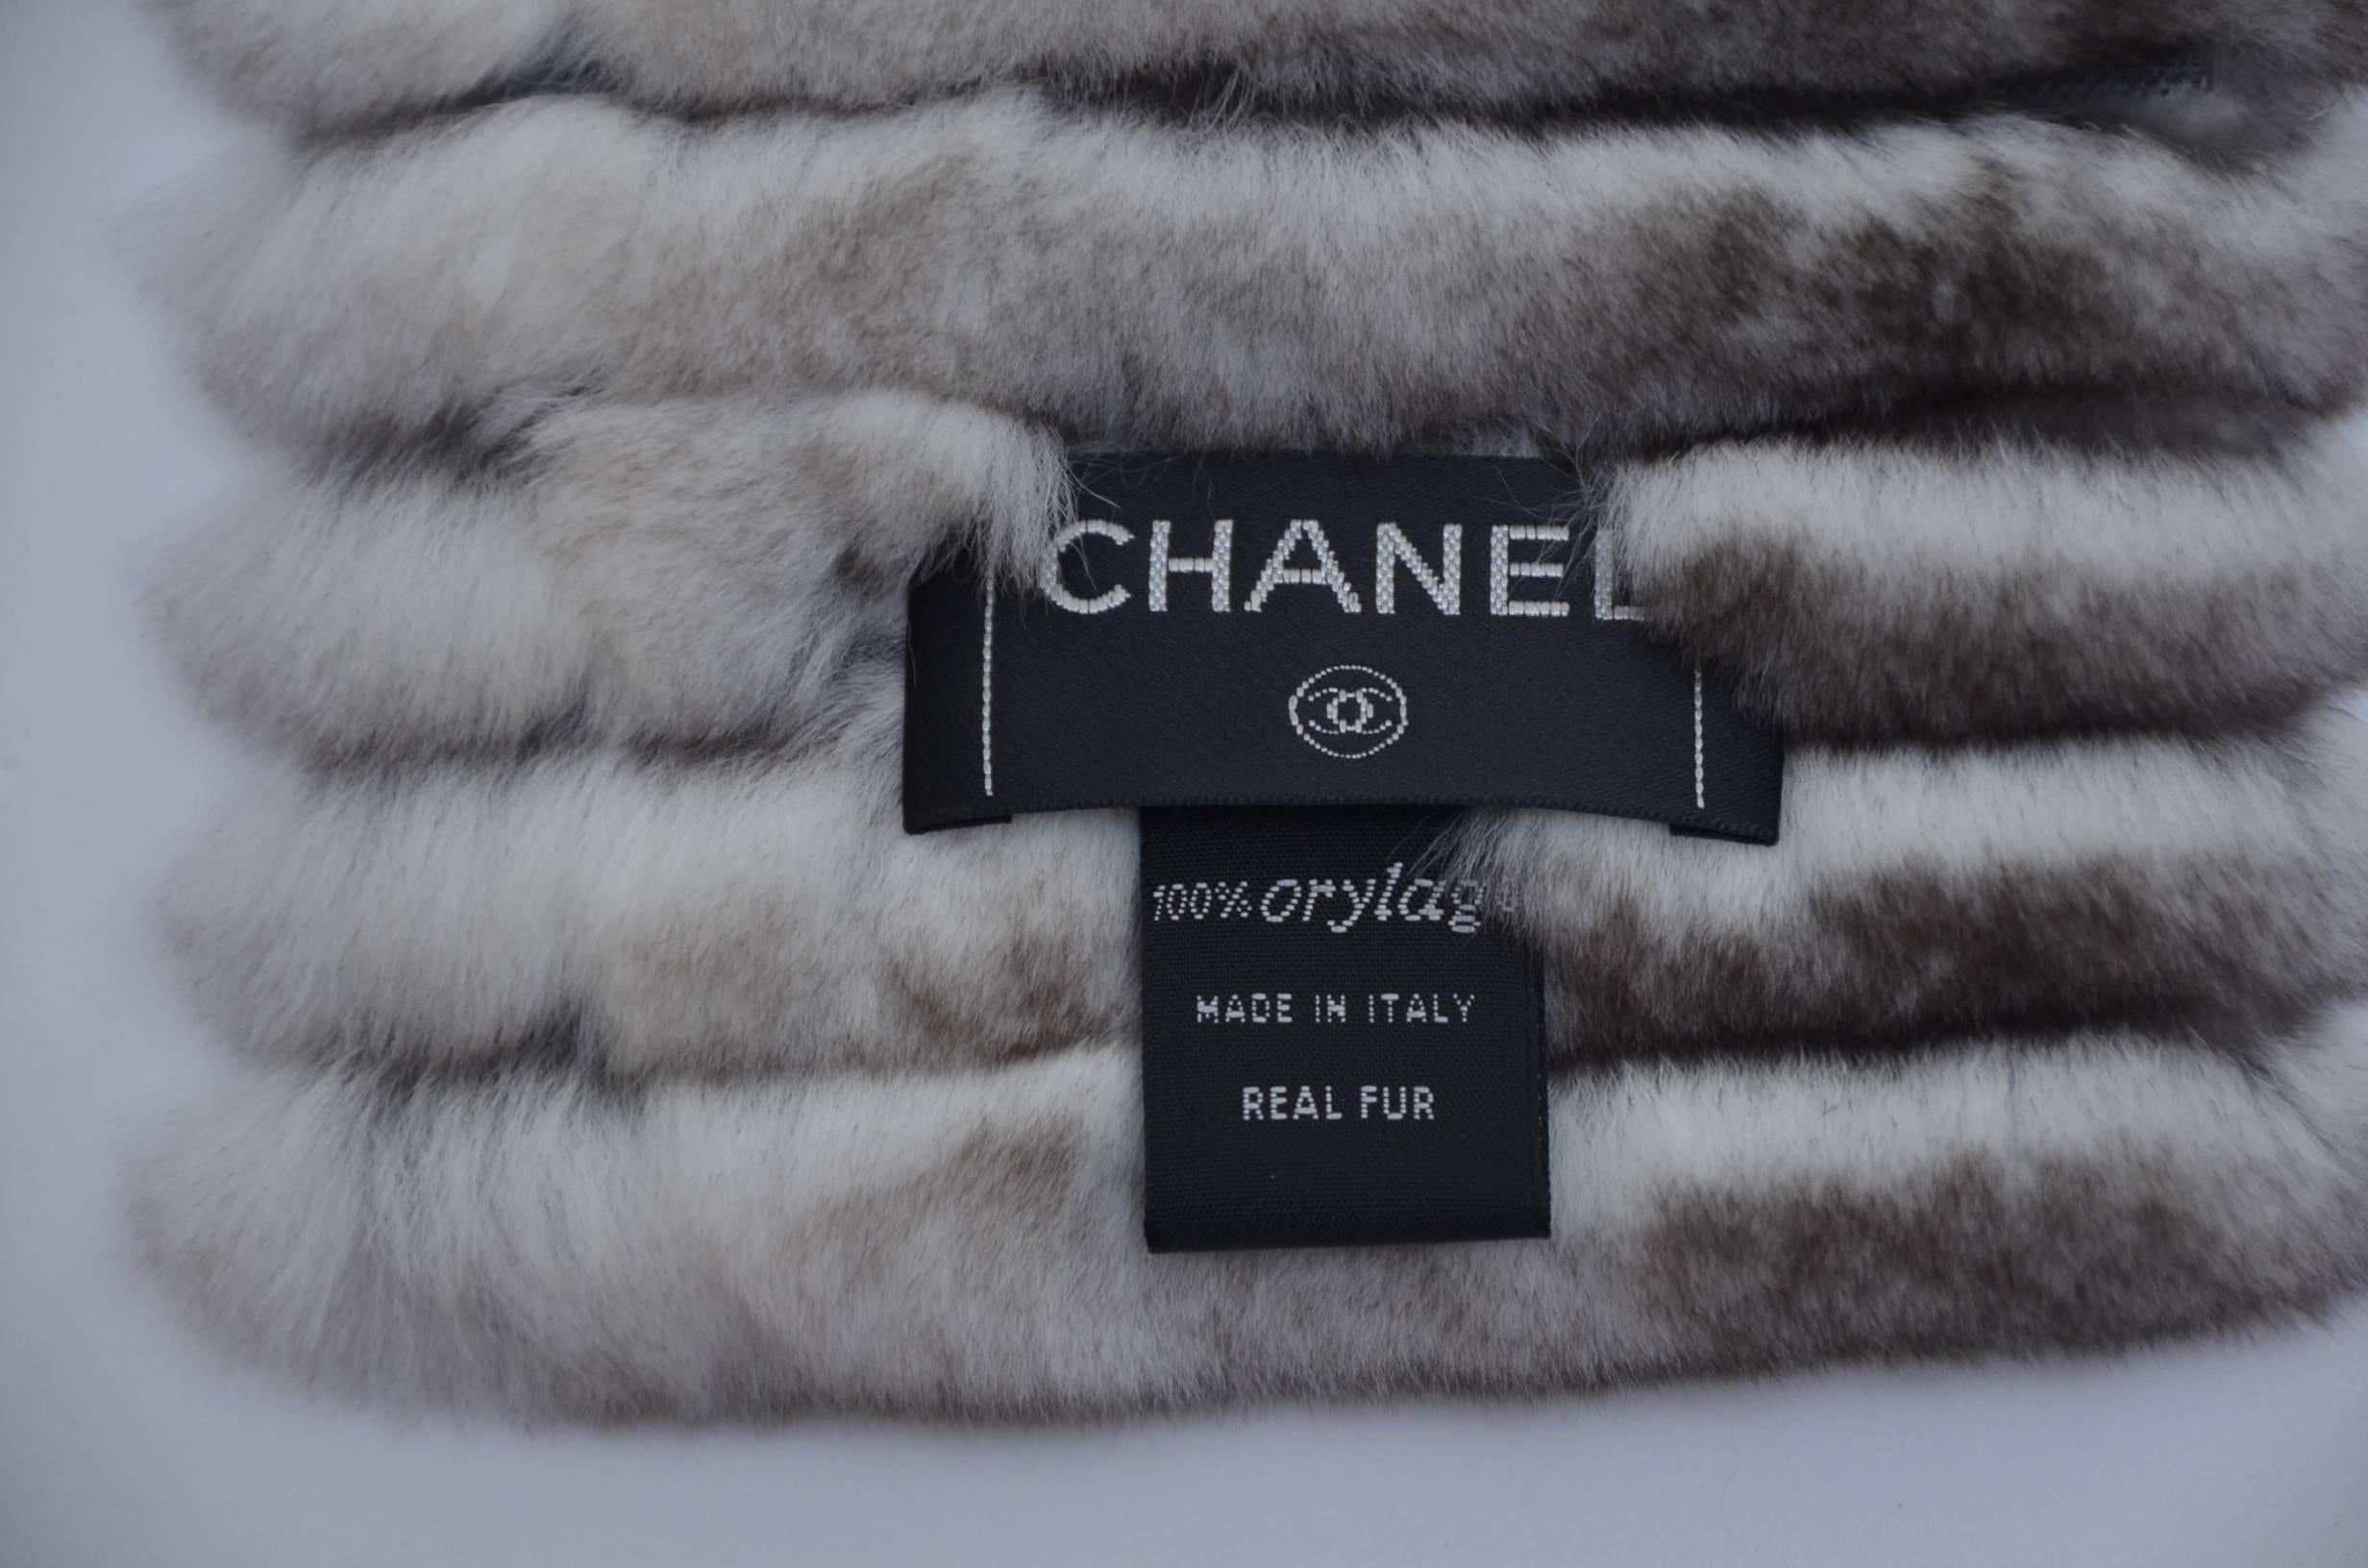 Creme and brown Chanel orylag fur scarf with CC at edge. 
Measurements: Length 48”, Width 5”
Fabric Content: 100% Orylag.
CC Chanel logo displayed  on one side of the scarf  but printed on booth side's.
Please see pictures
Pristine  like new